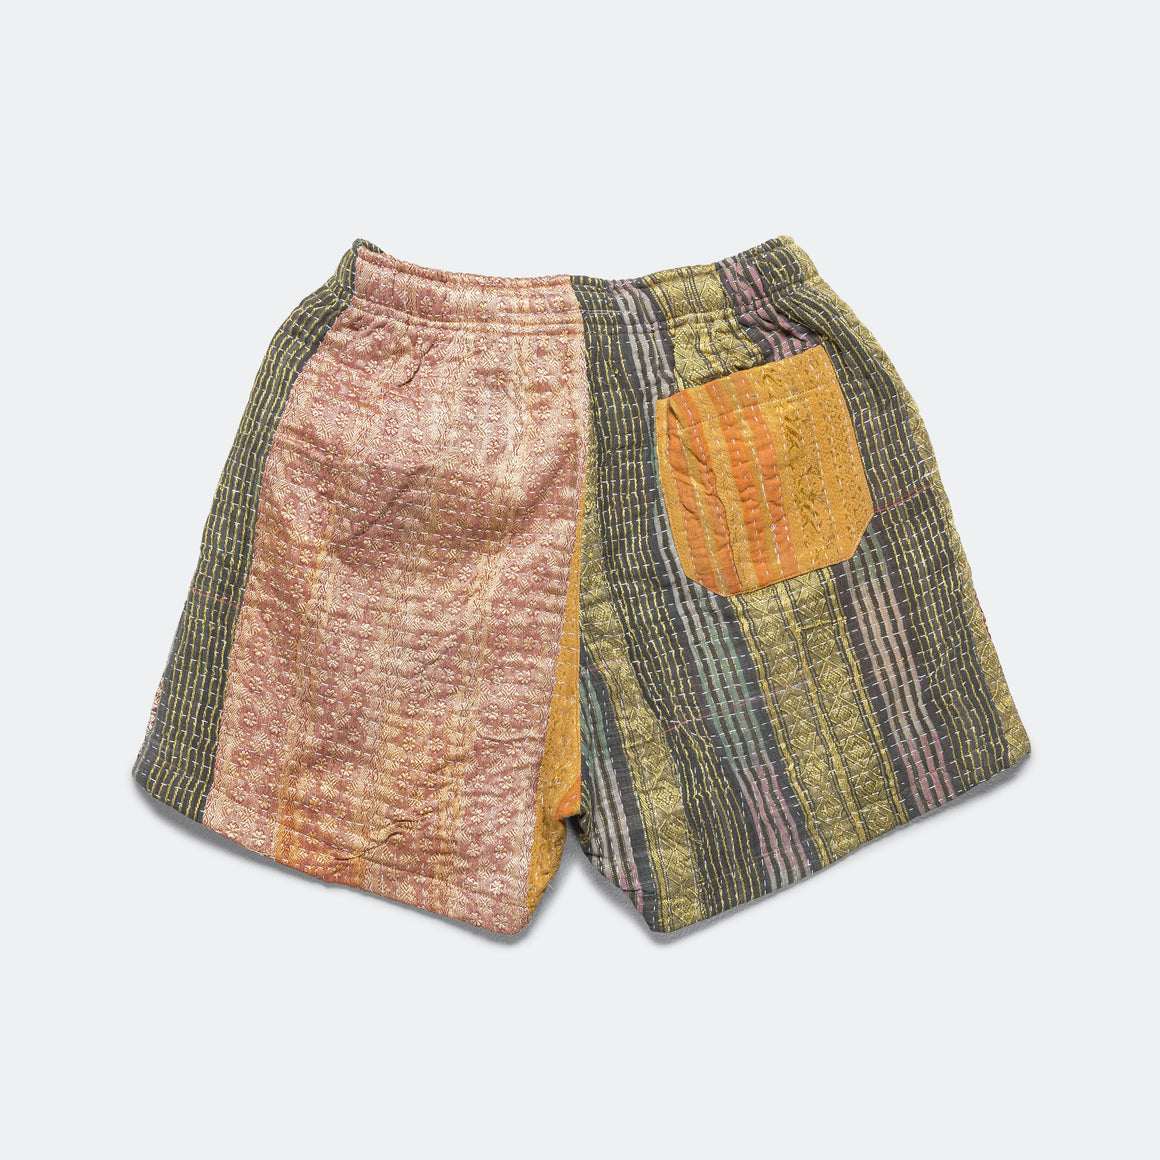 Kartik Research - One Of One Vintage Kantha Shorts - 28" - UP THERE